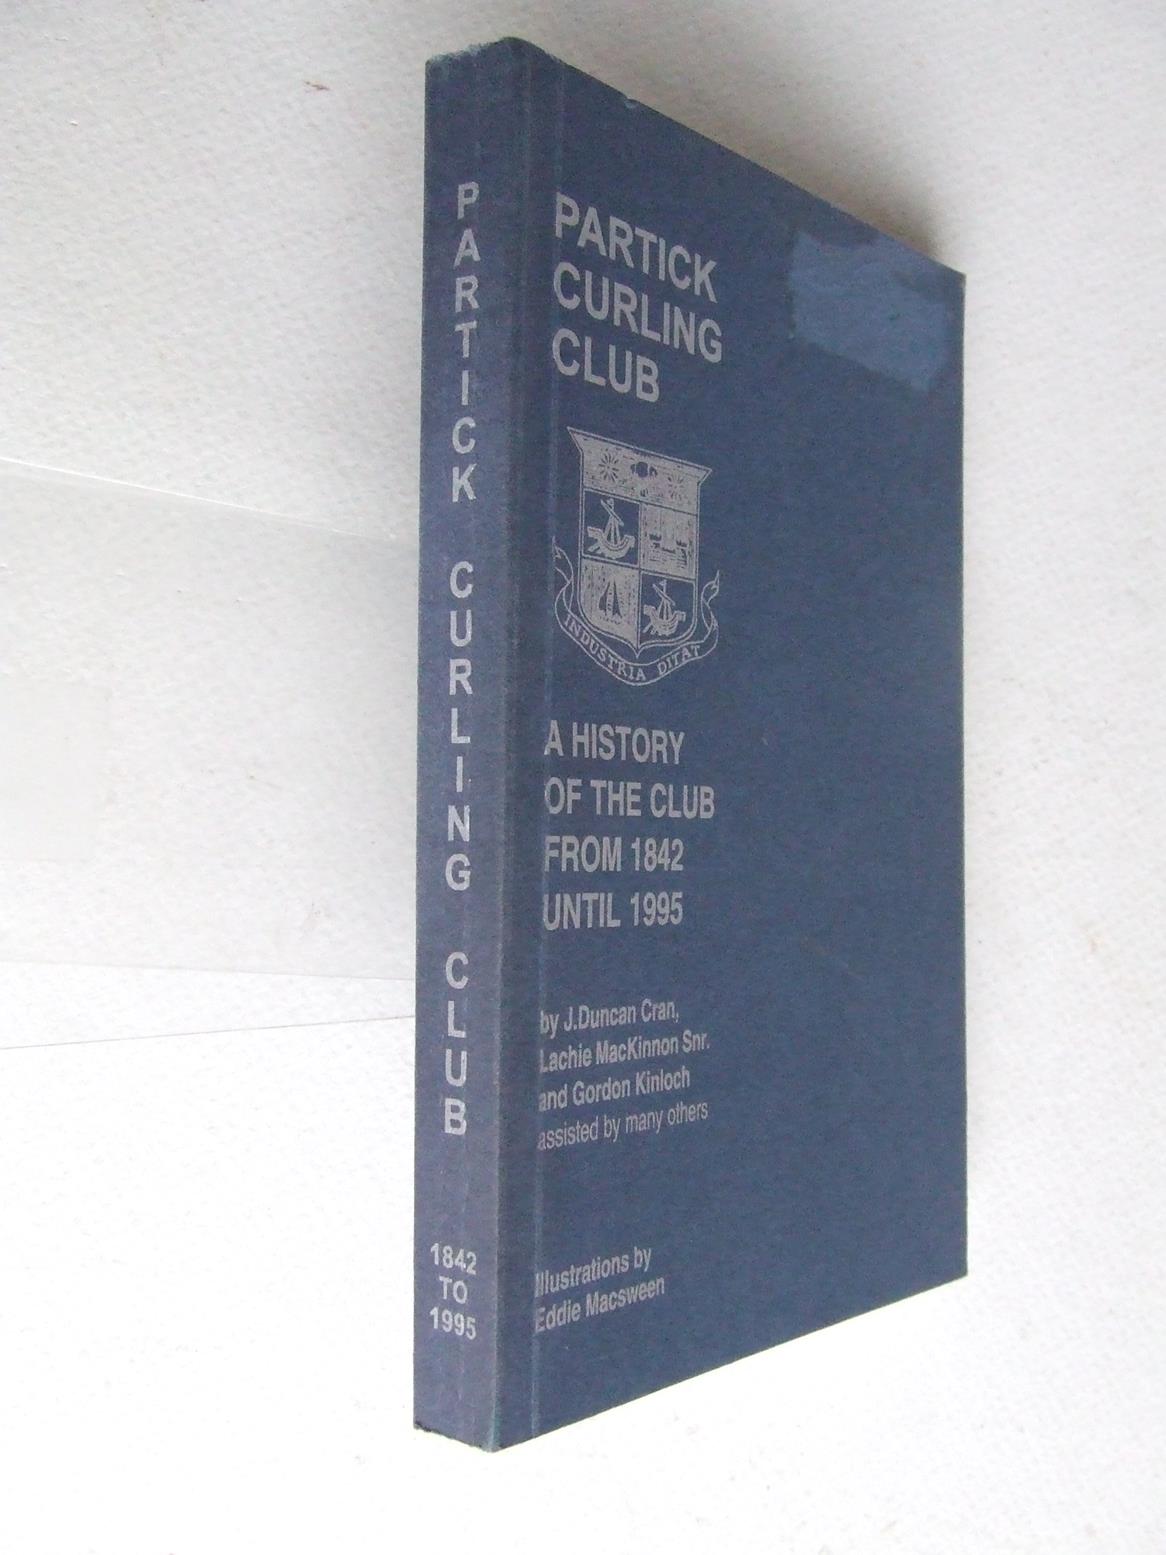 Partick Curling Club, a history of the club from 1842 until 1995